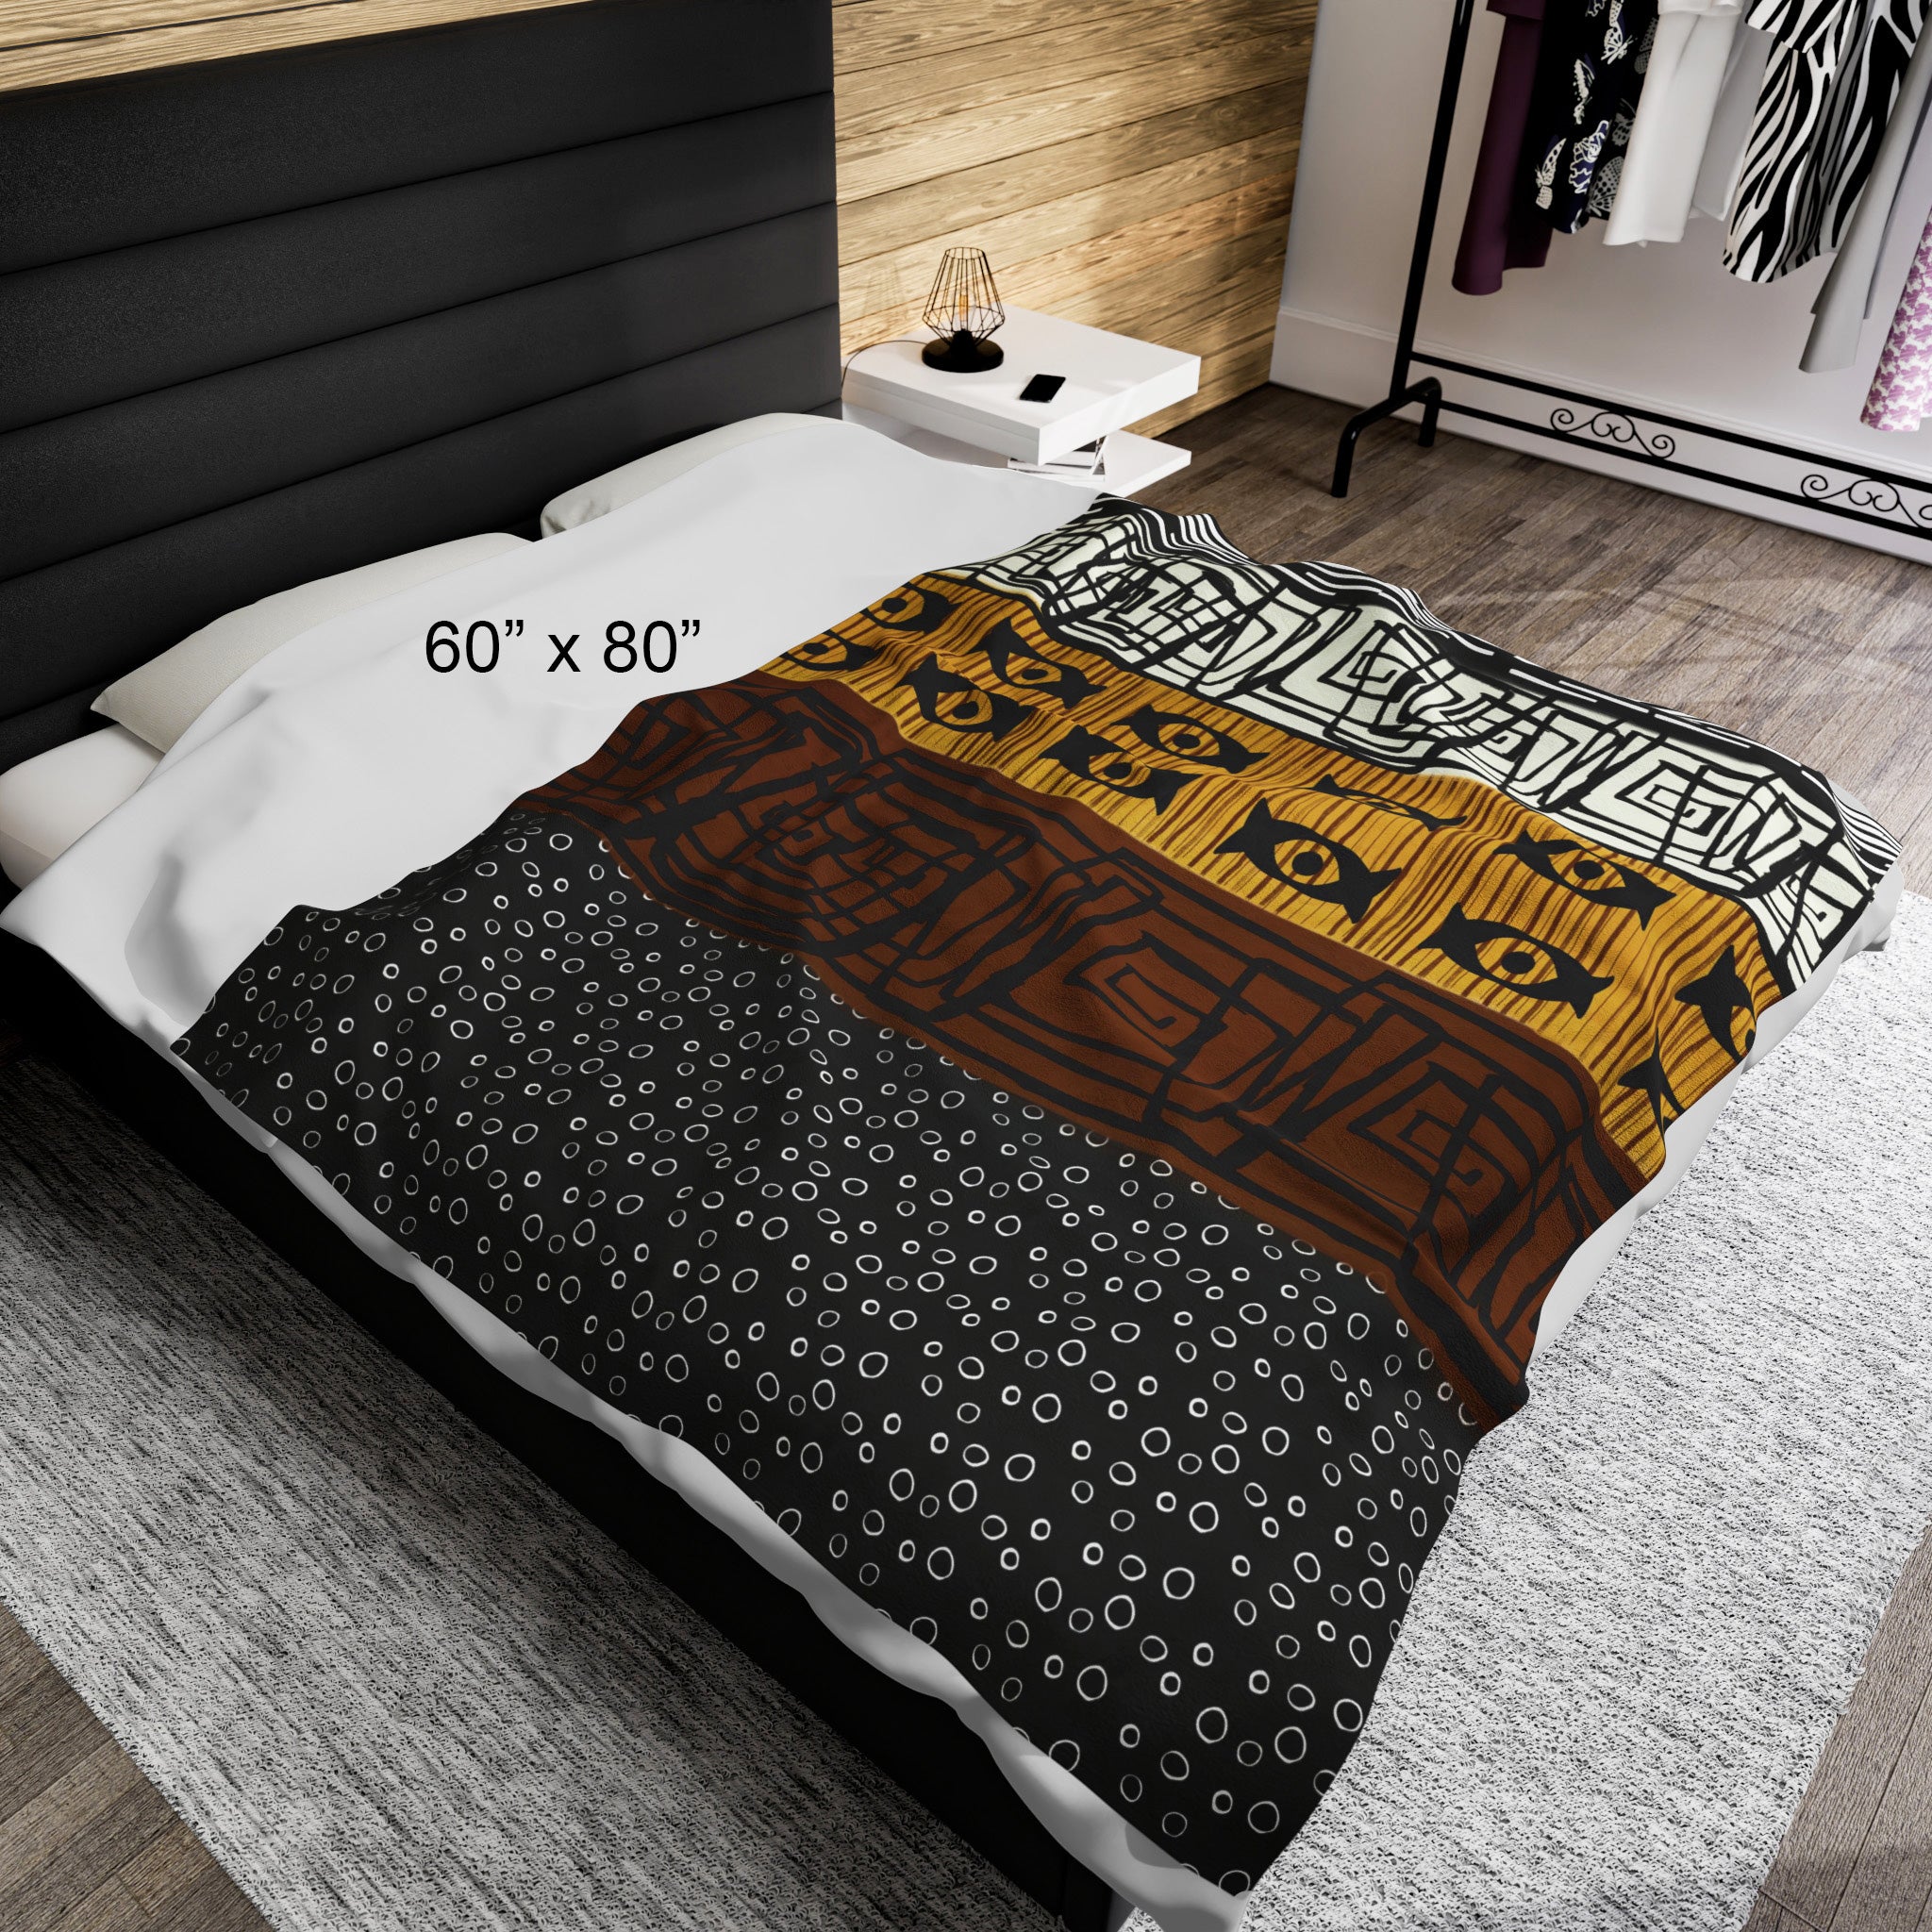 60"x80" African Print Velveteen Blanket laying horizontal on a full size bed..